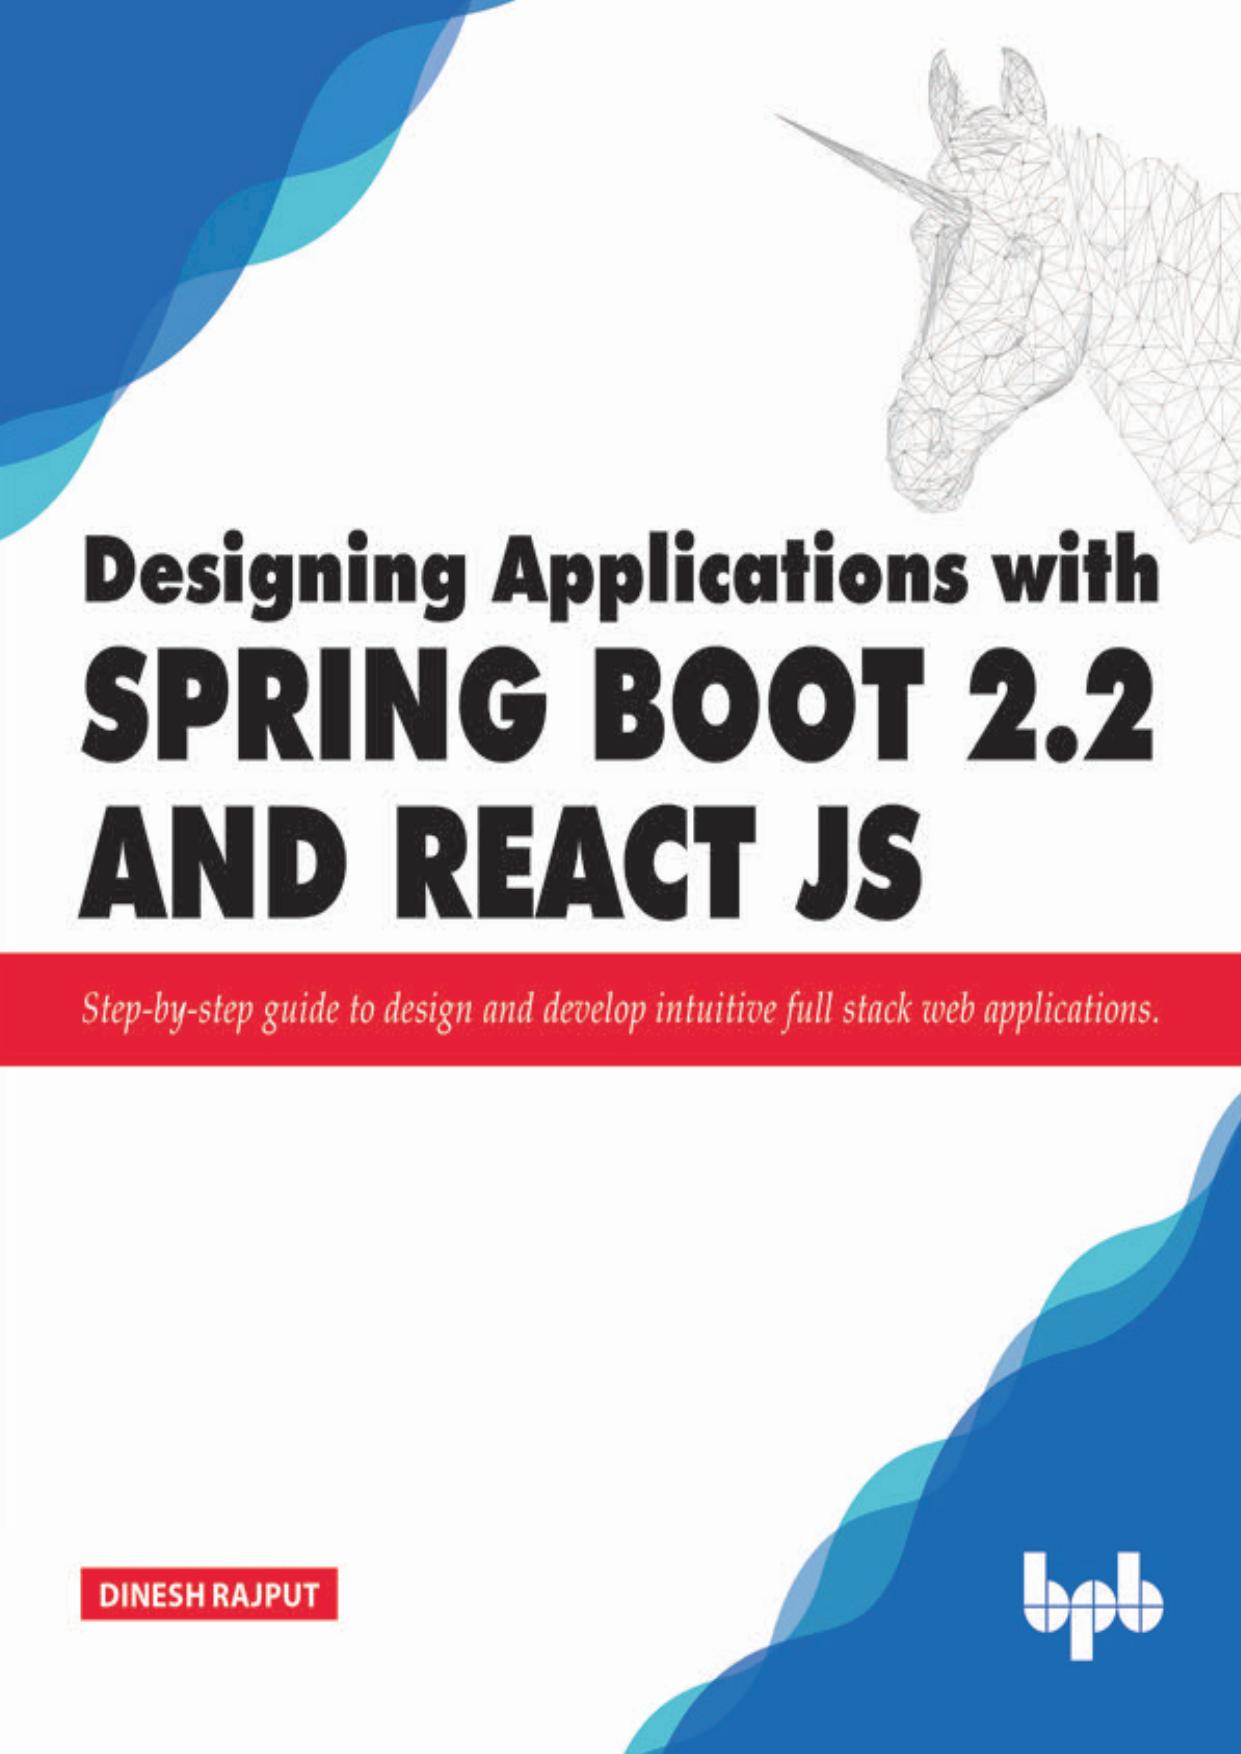 Designing Applications With Spring Boot 2.2 and React JS: Step-By-Step Guide to Design and Develop Intuitive Full Stack Web Applications